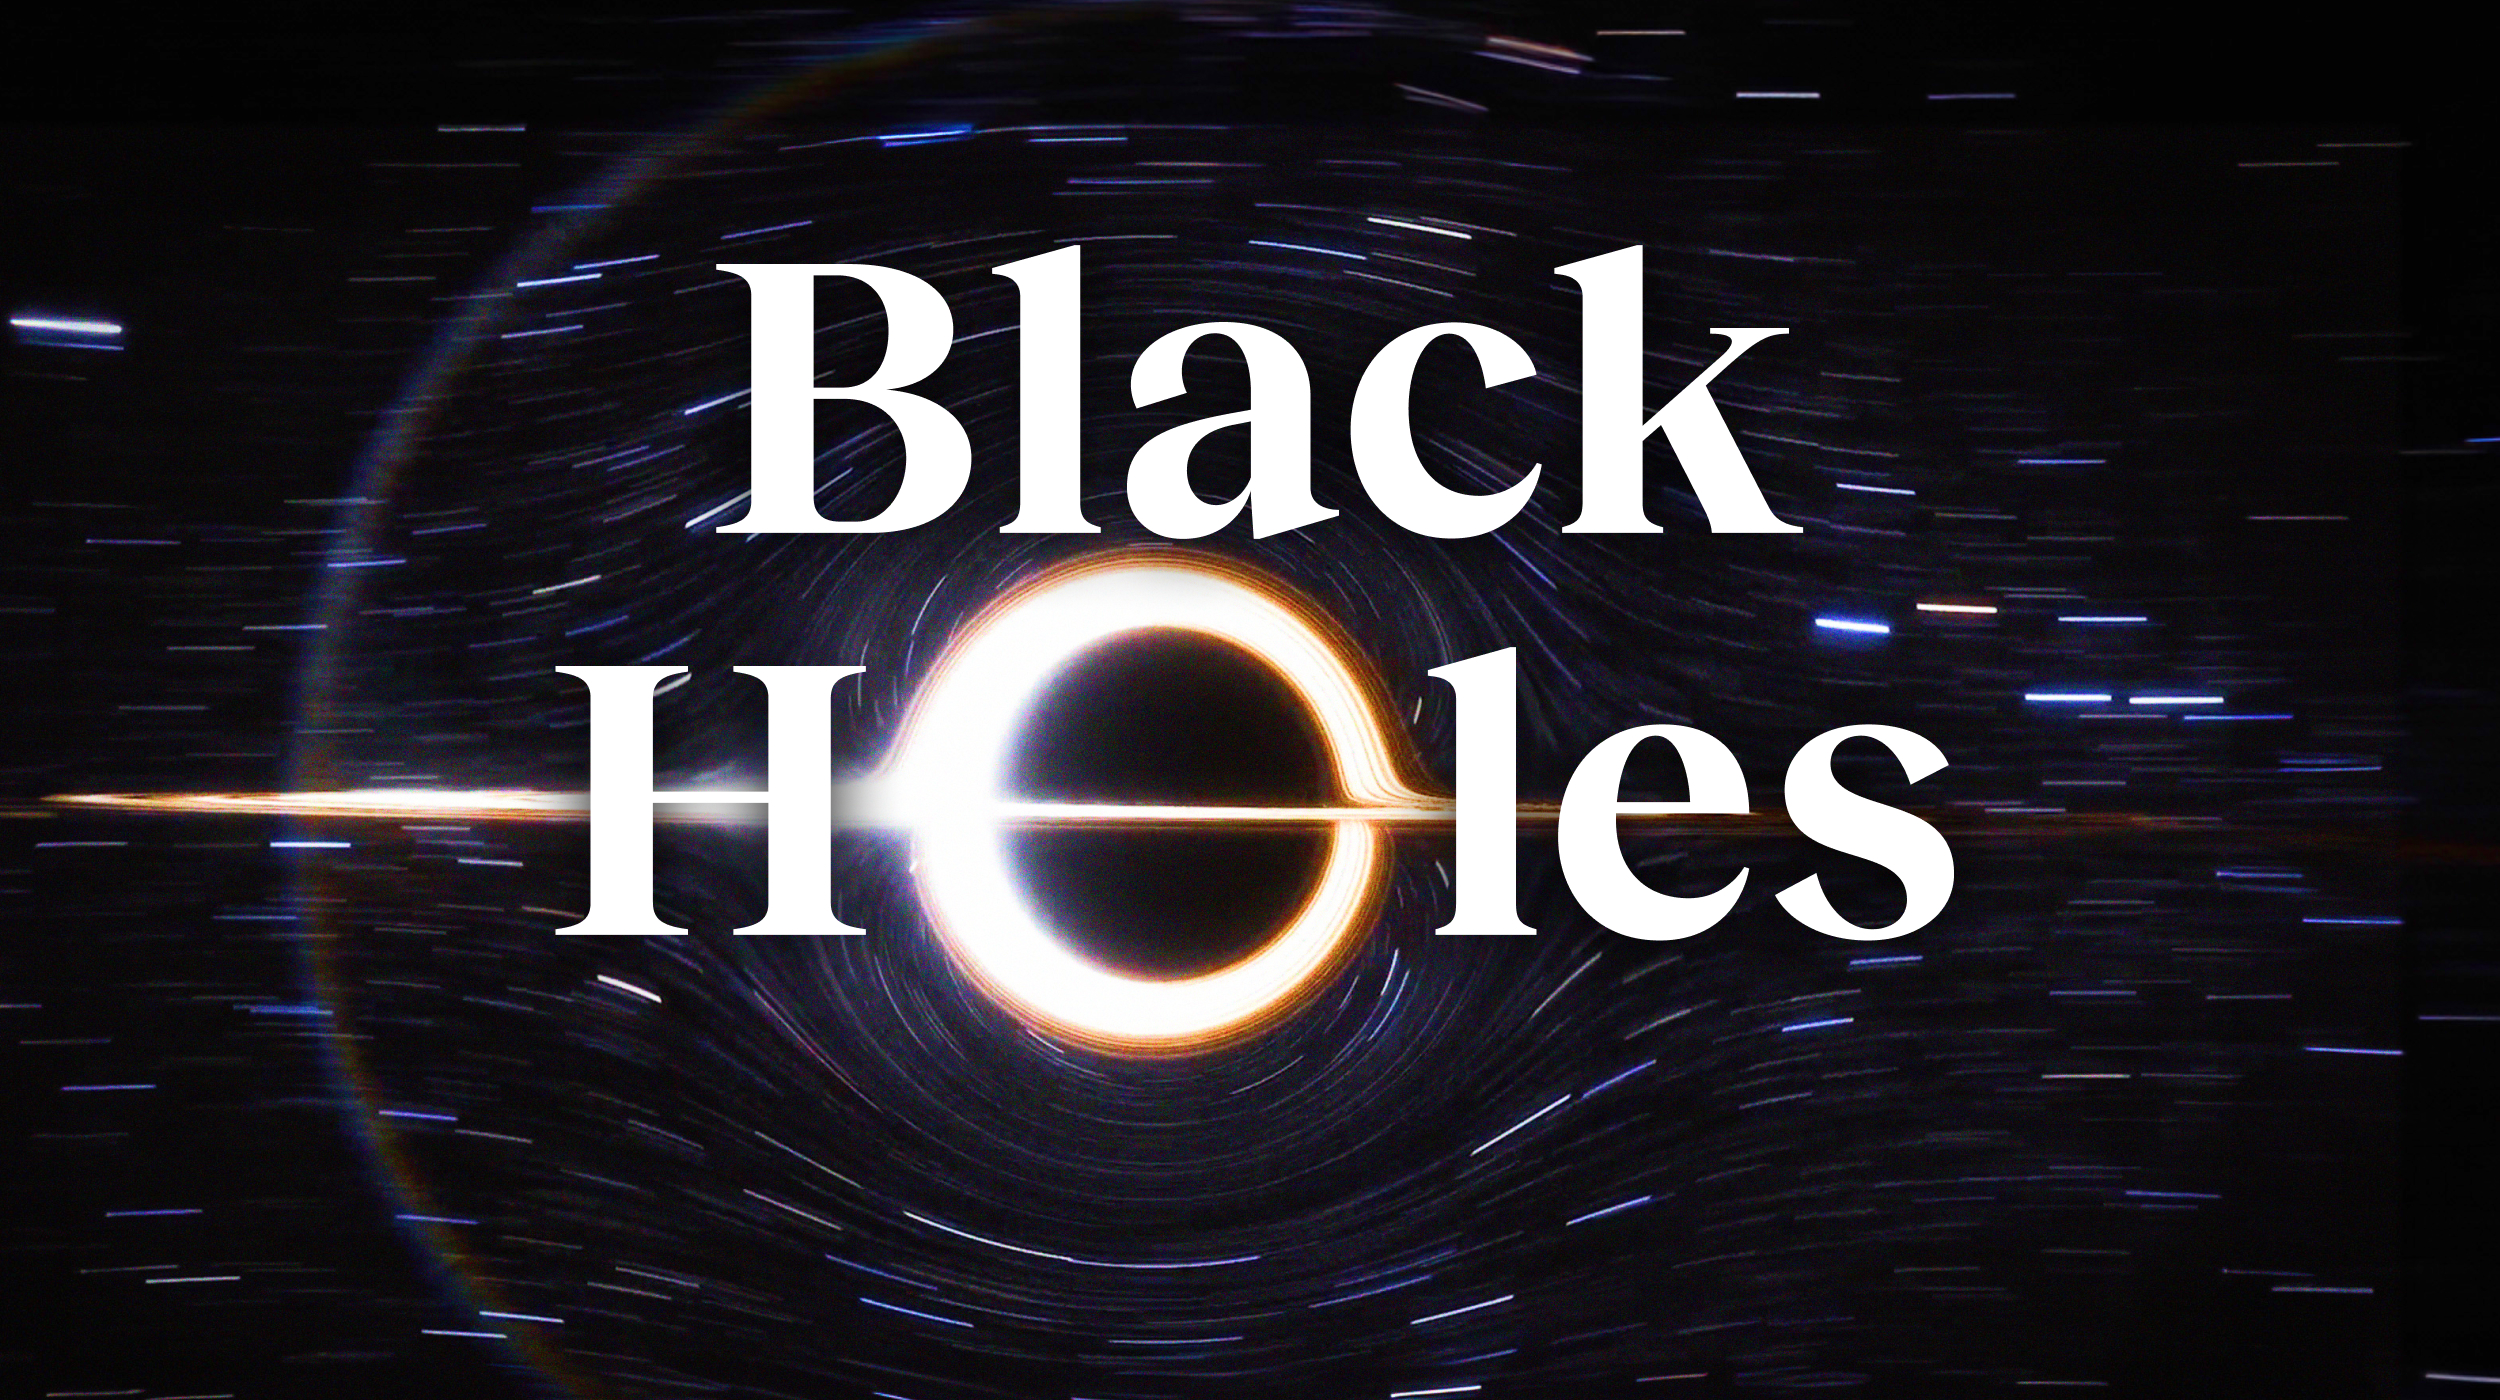 The black holes logo with a starry background.